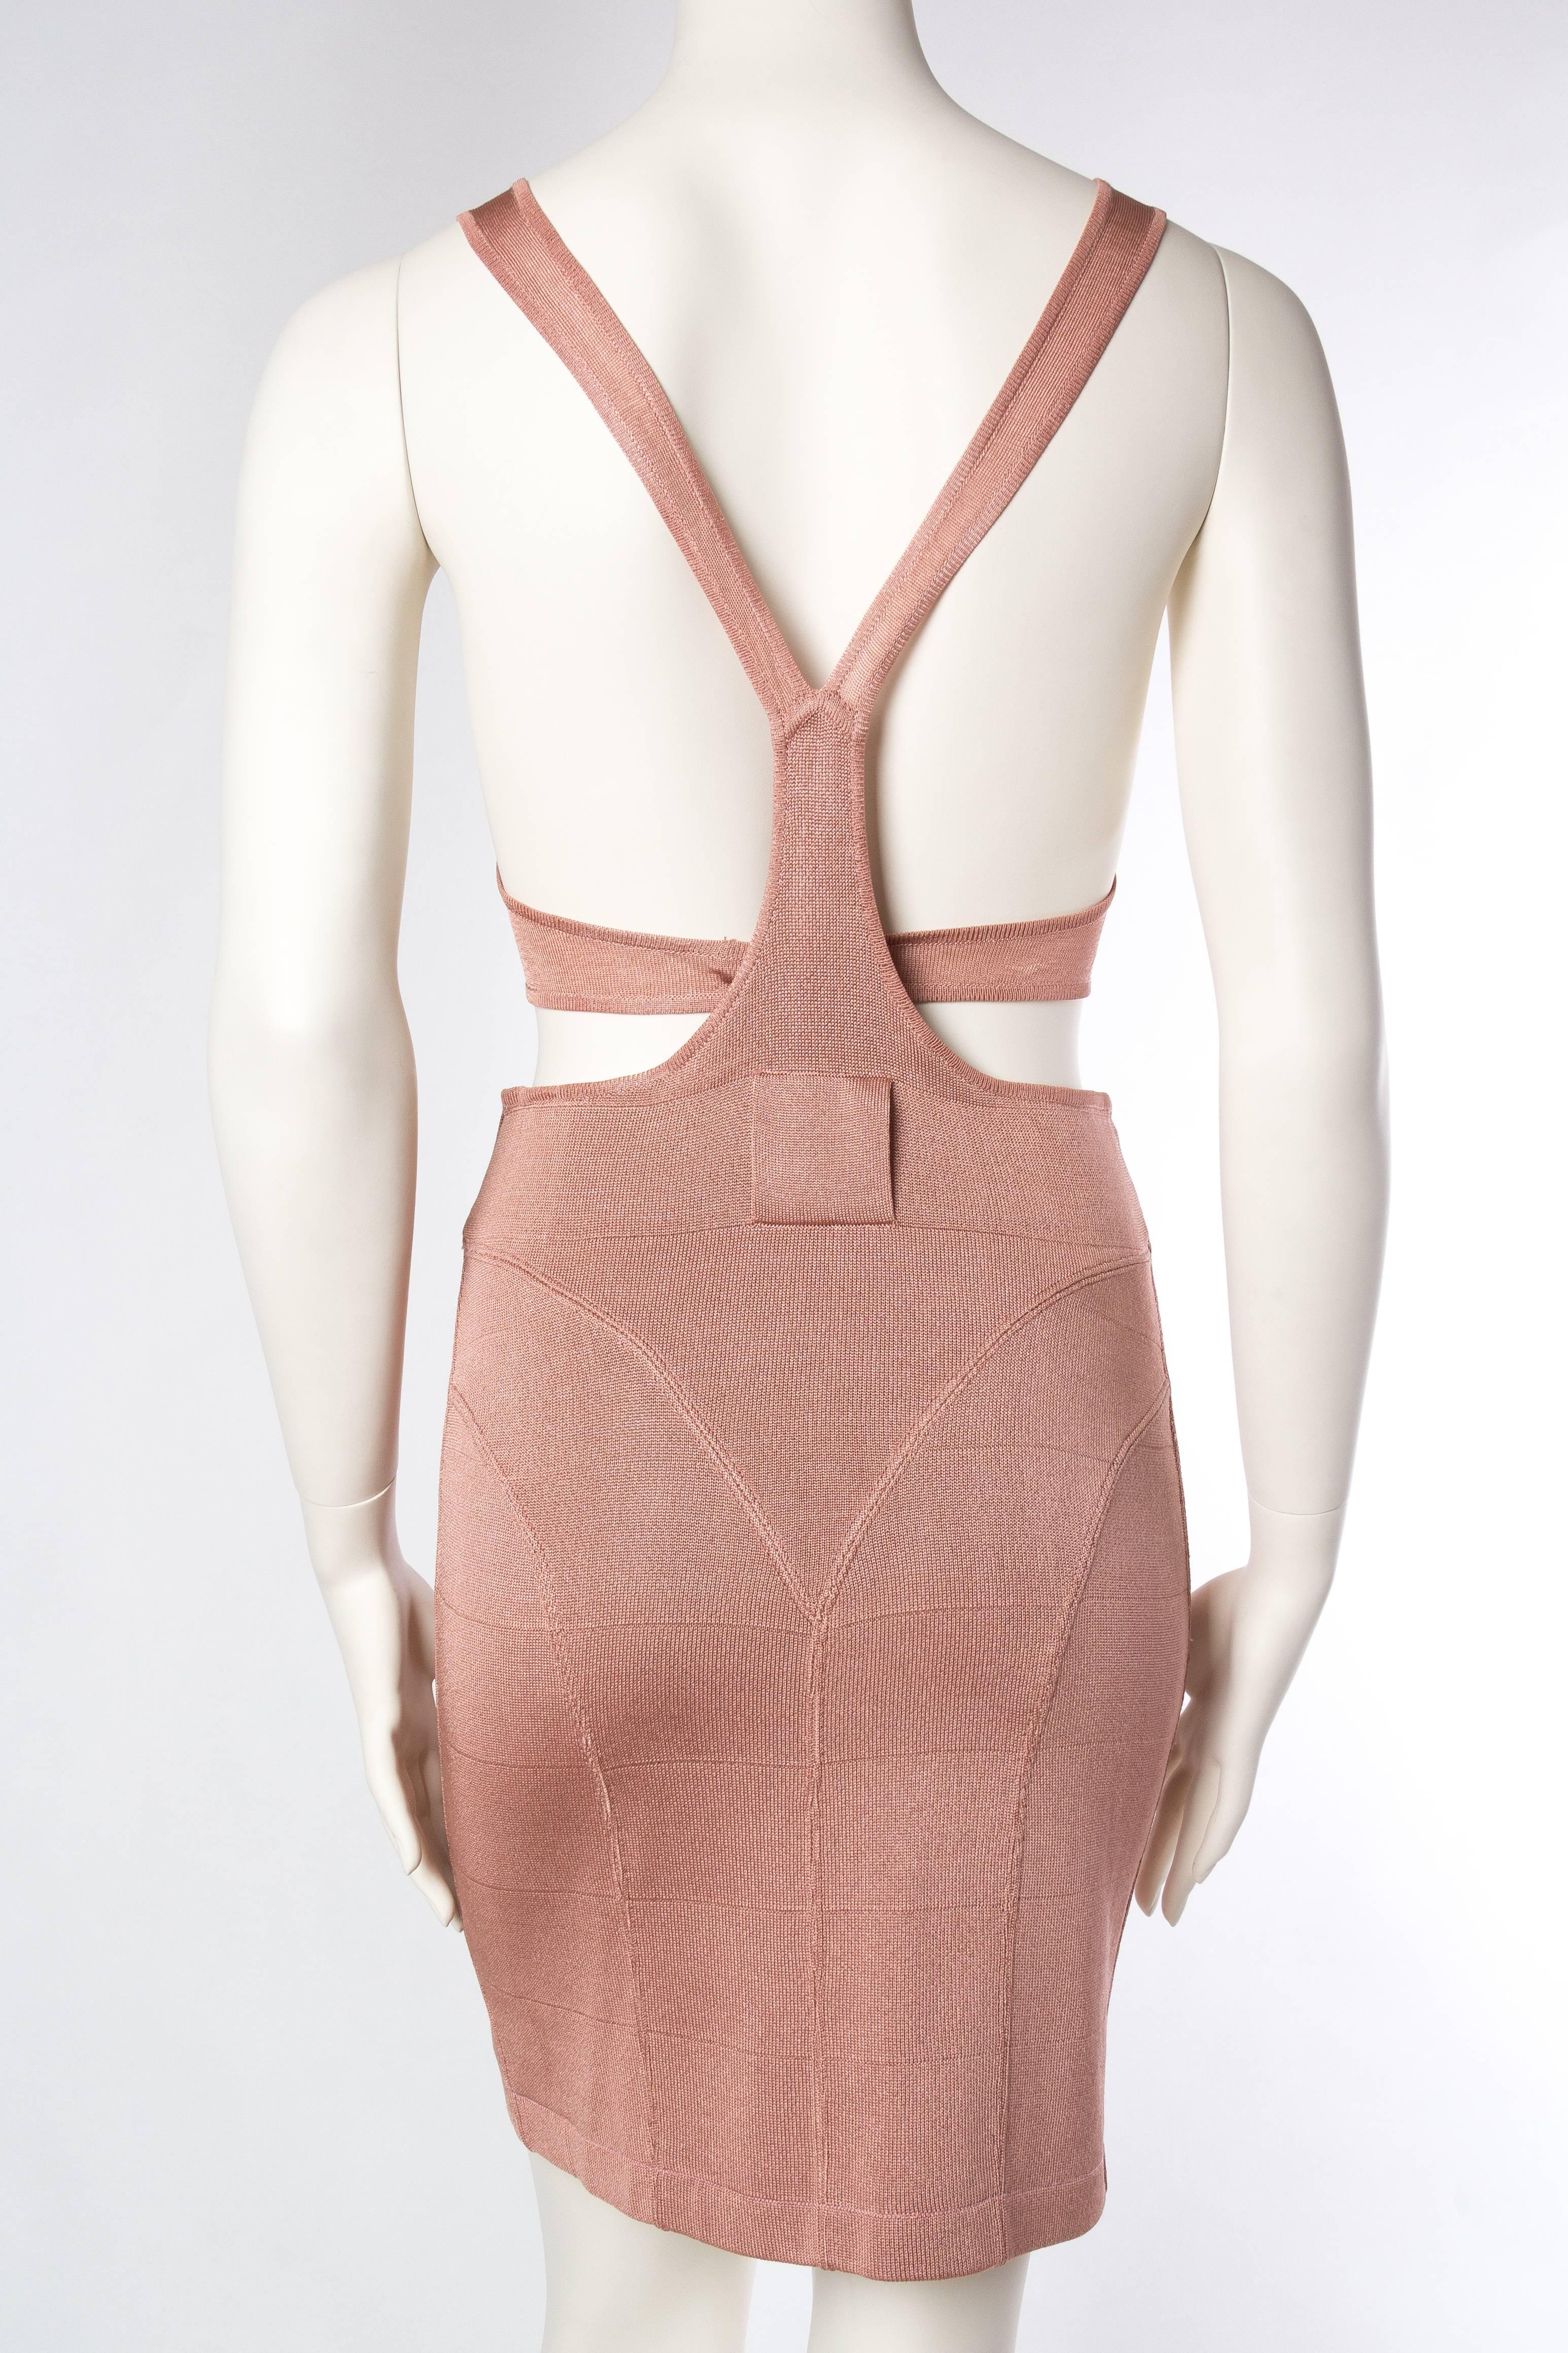 Women's 1990 ALAIA Blush Pink Rayon Jersey Bodycon Cocktail Dress With Cut Out Racer Ba For Sale